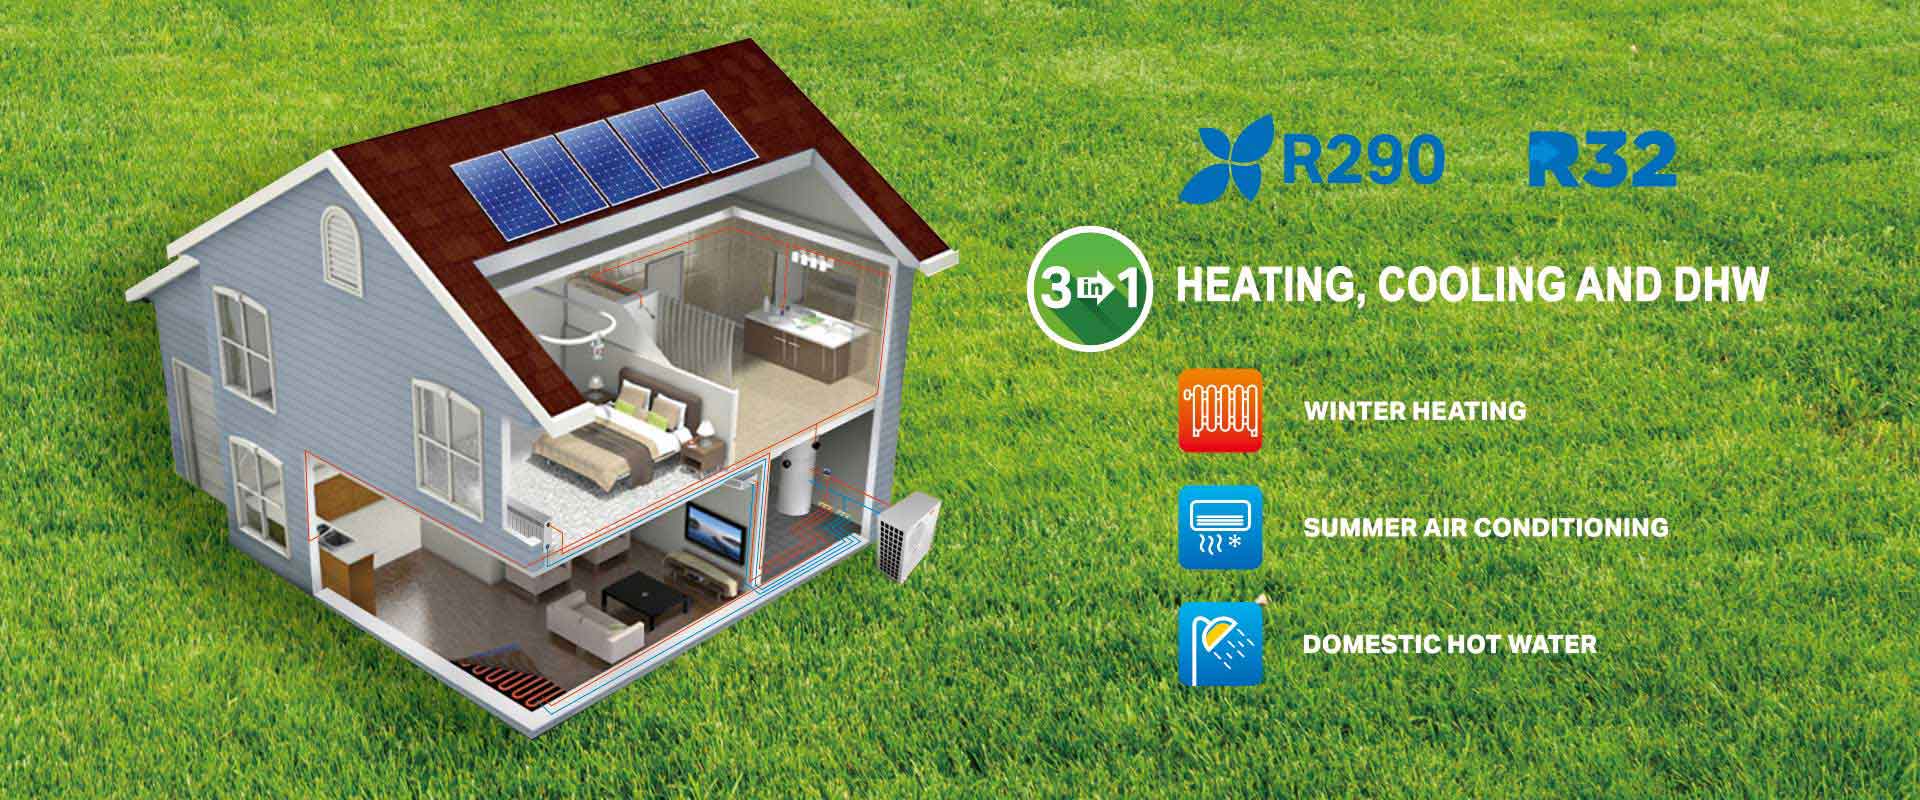 Geothermal Heat Pump Technology in India